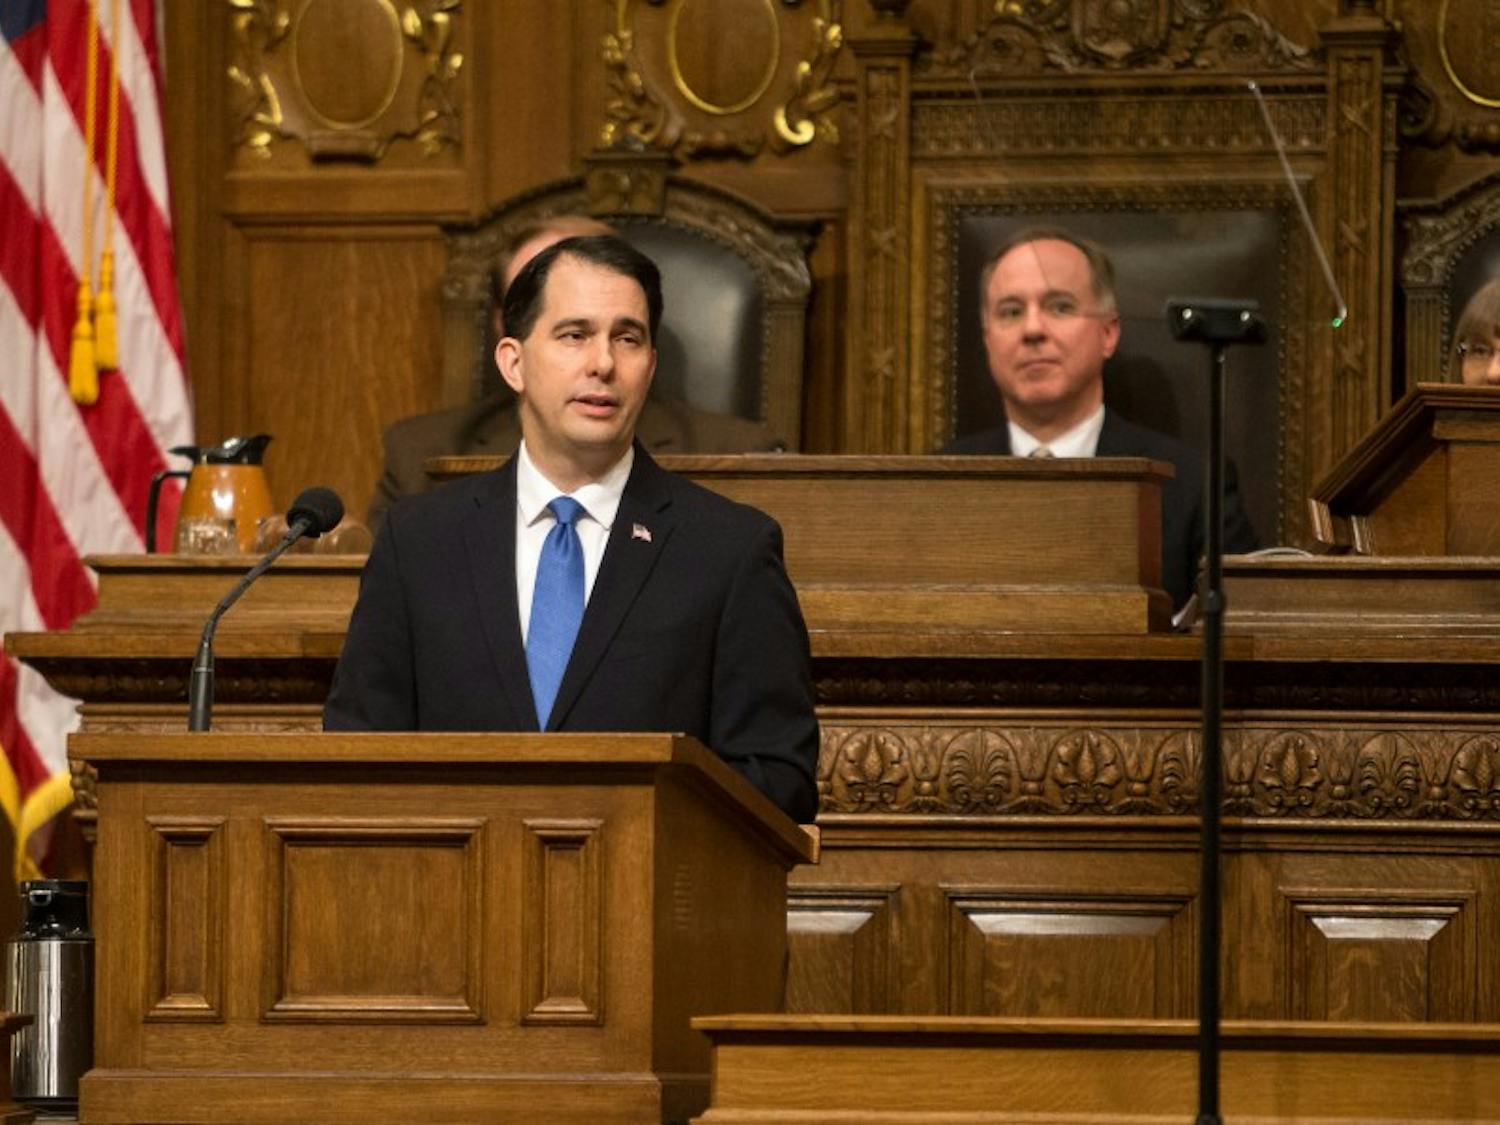 After multiple wins for Wisconsin Democrats, Gov. Walker expressed concern for a “blue wave” hitting the state.